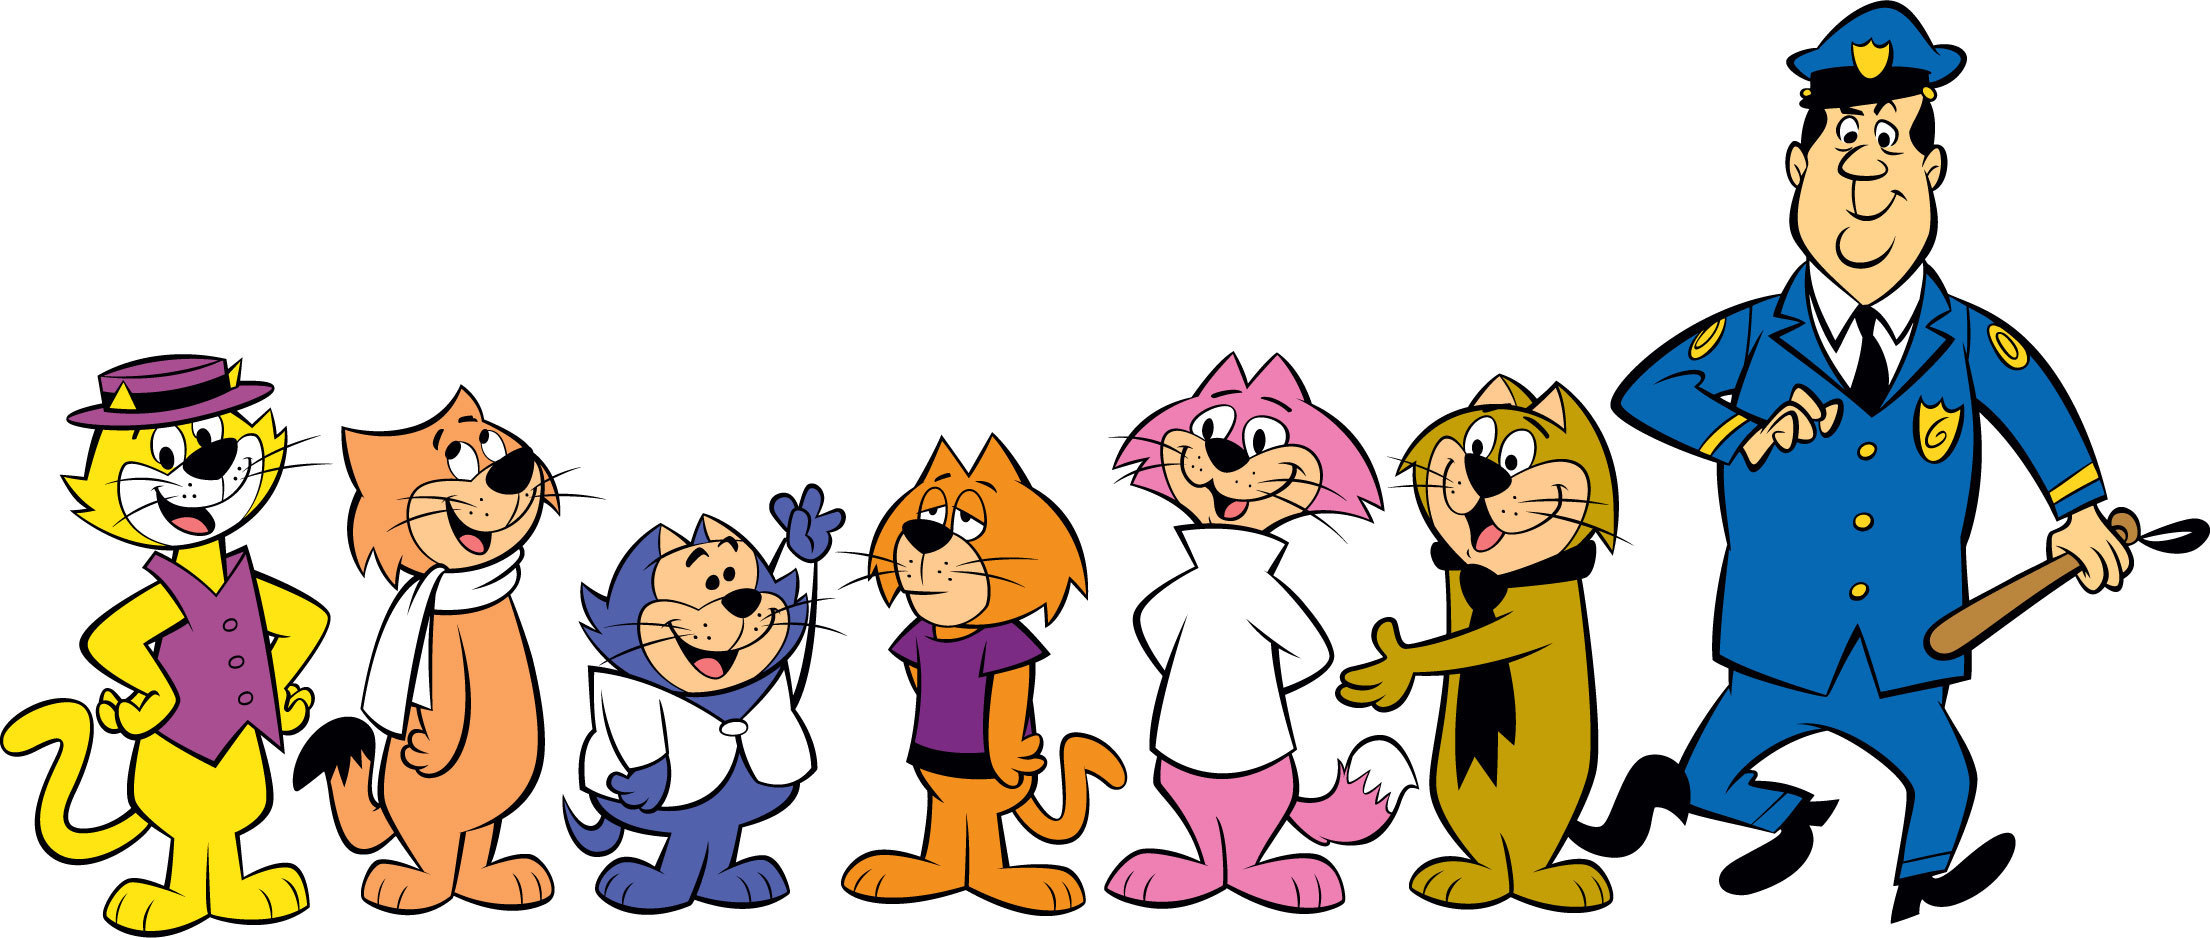 Top Cat Image Tc And The Gang HD Wallpaper Background Photos